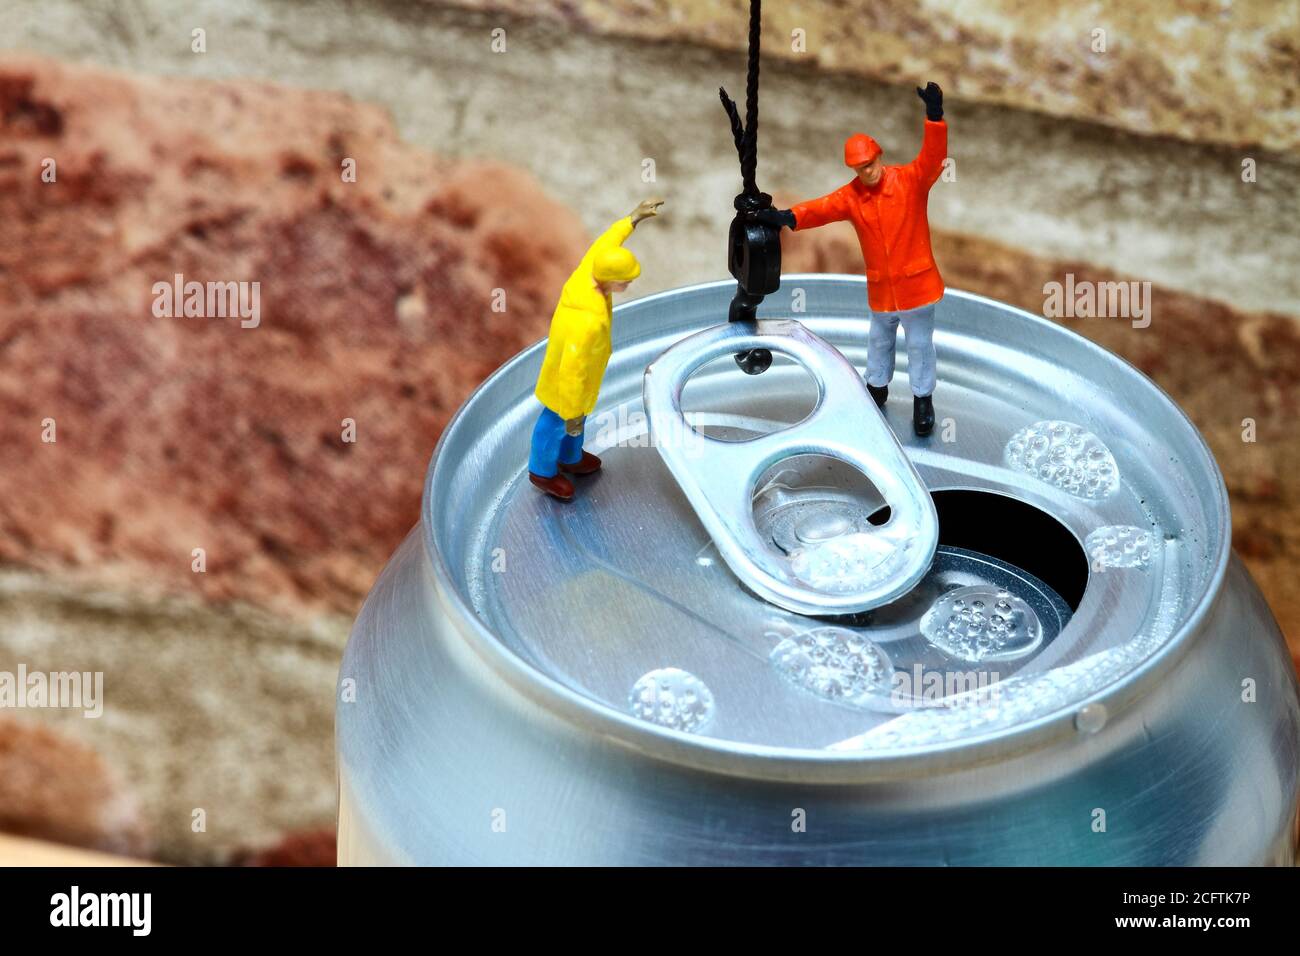 Conceptual image of miniature figure workmen attaching a cranes hook to the ring pull of an aluminium fizzy drinks can Stock Photo